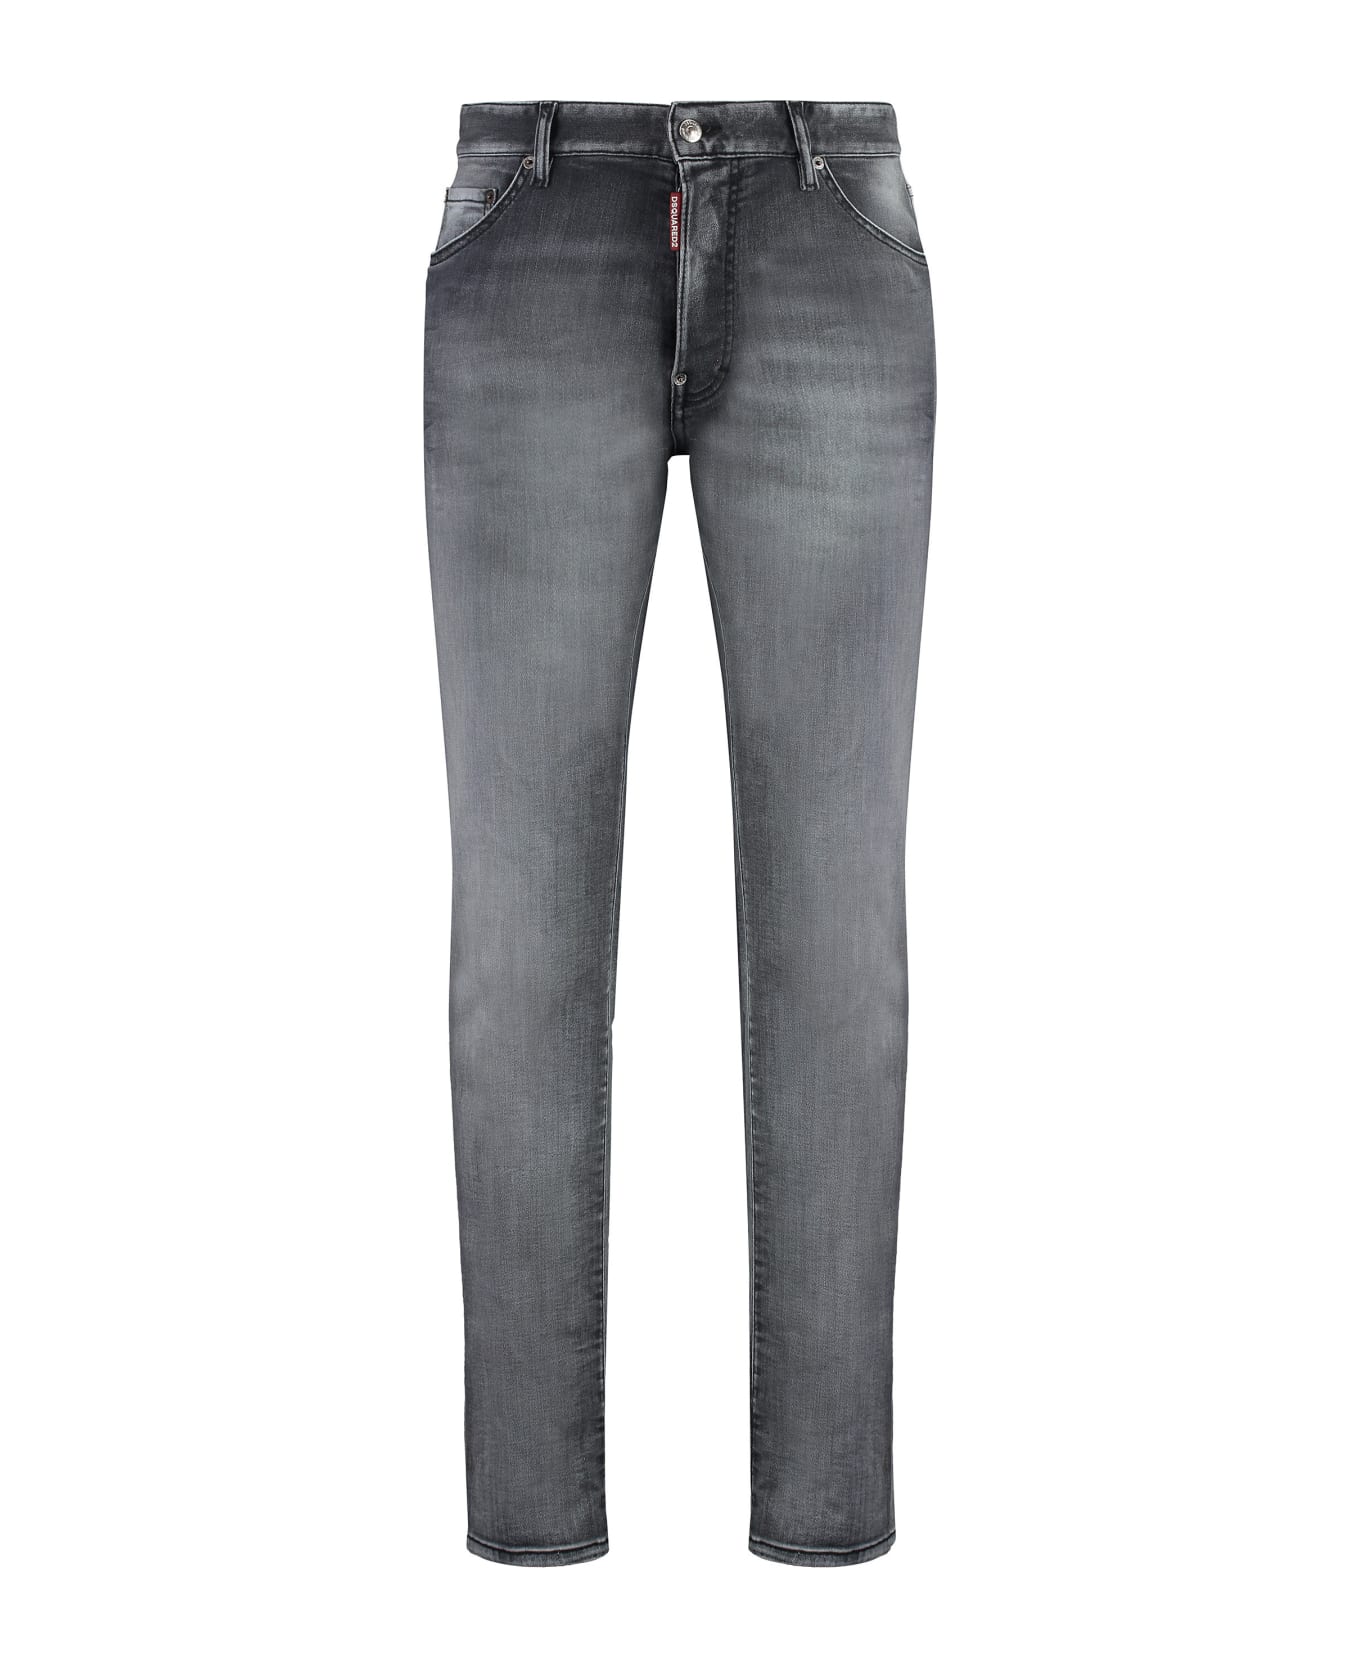 Dsquared2 Cool Guy Jeans - grey